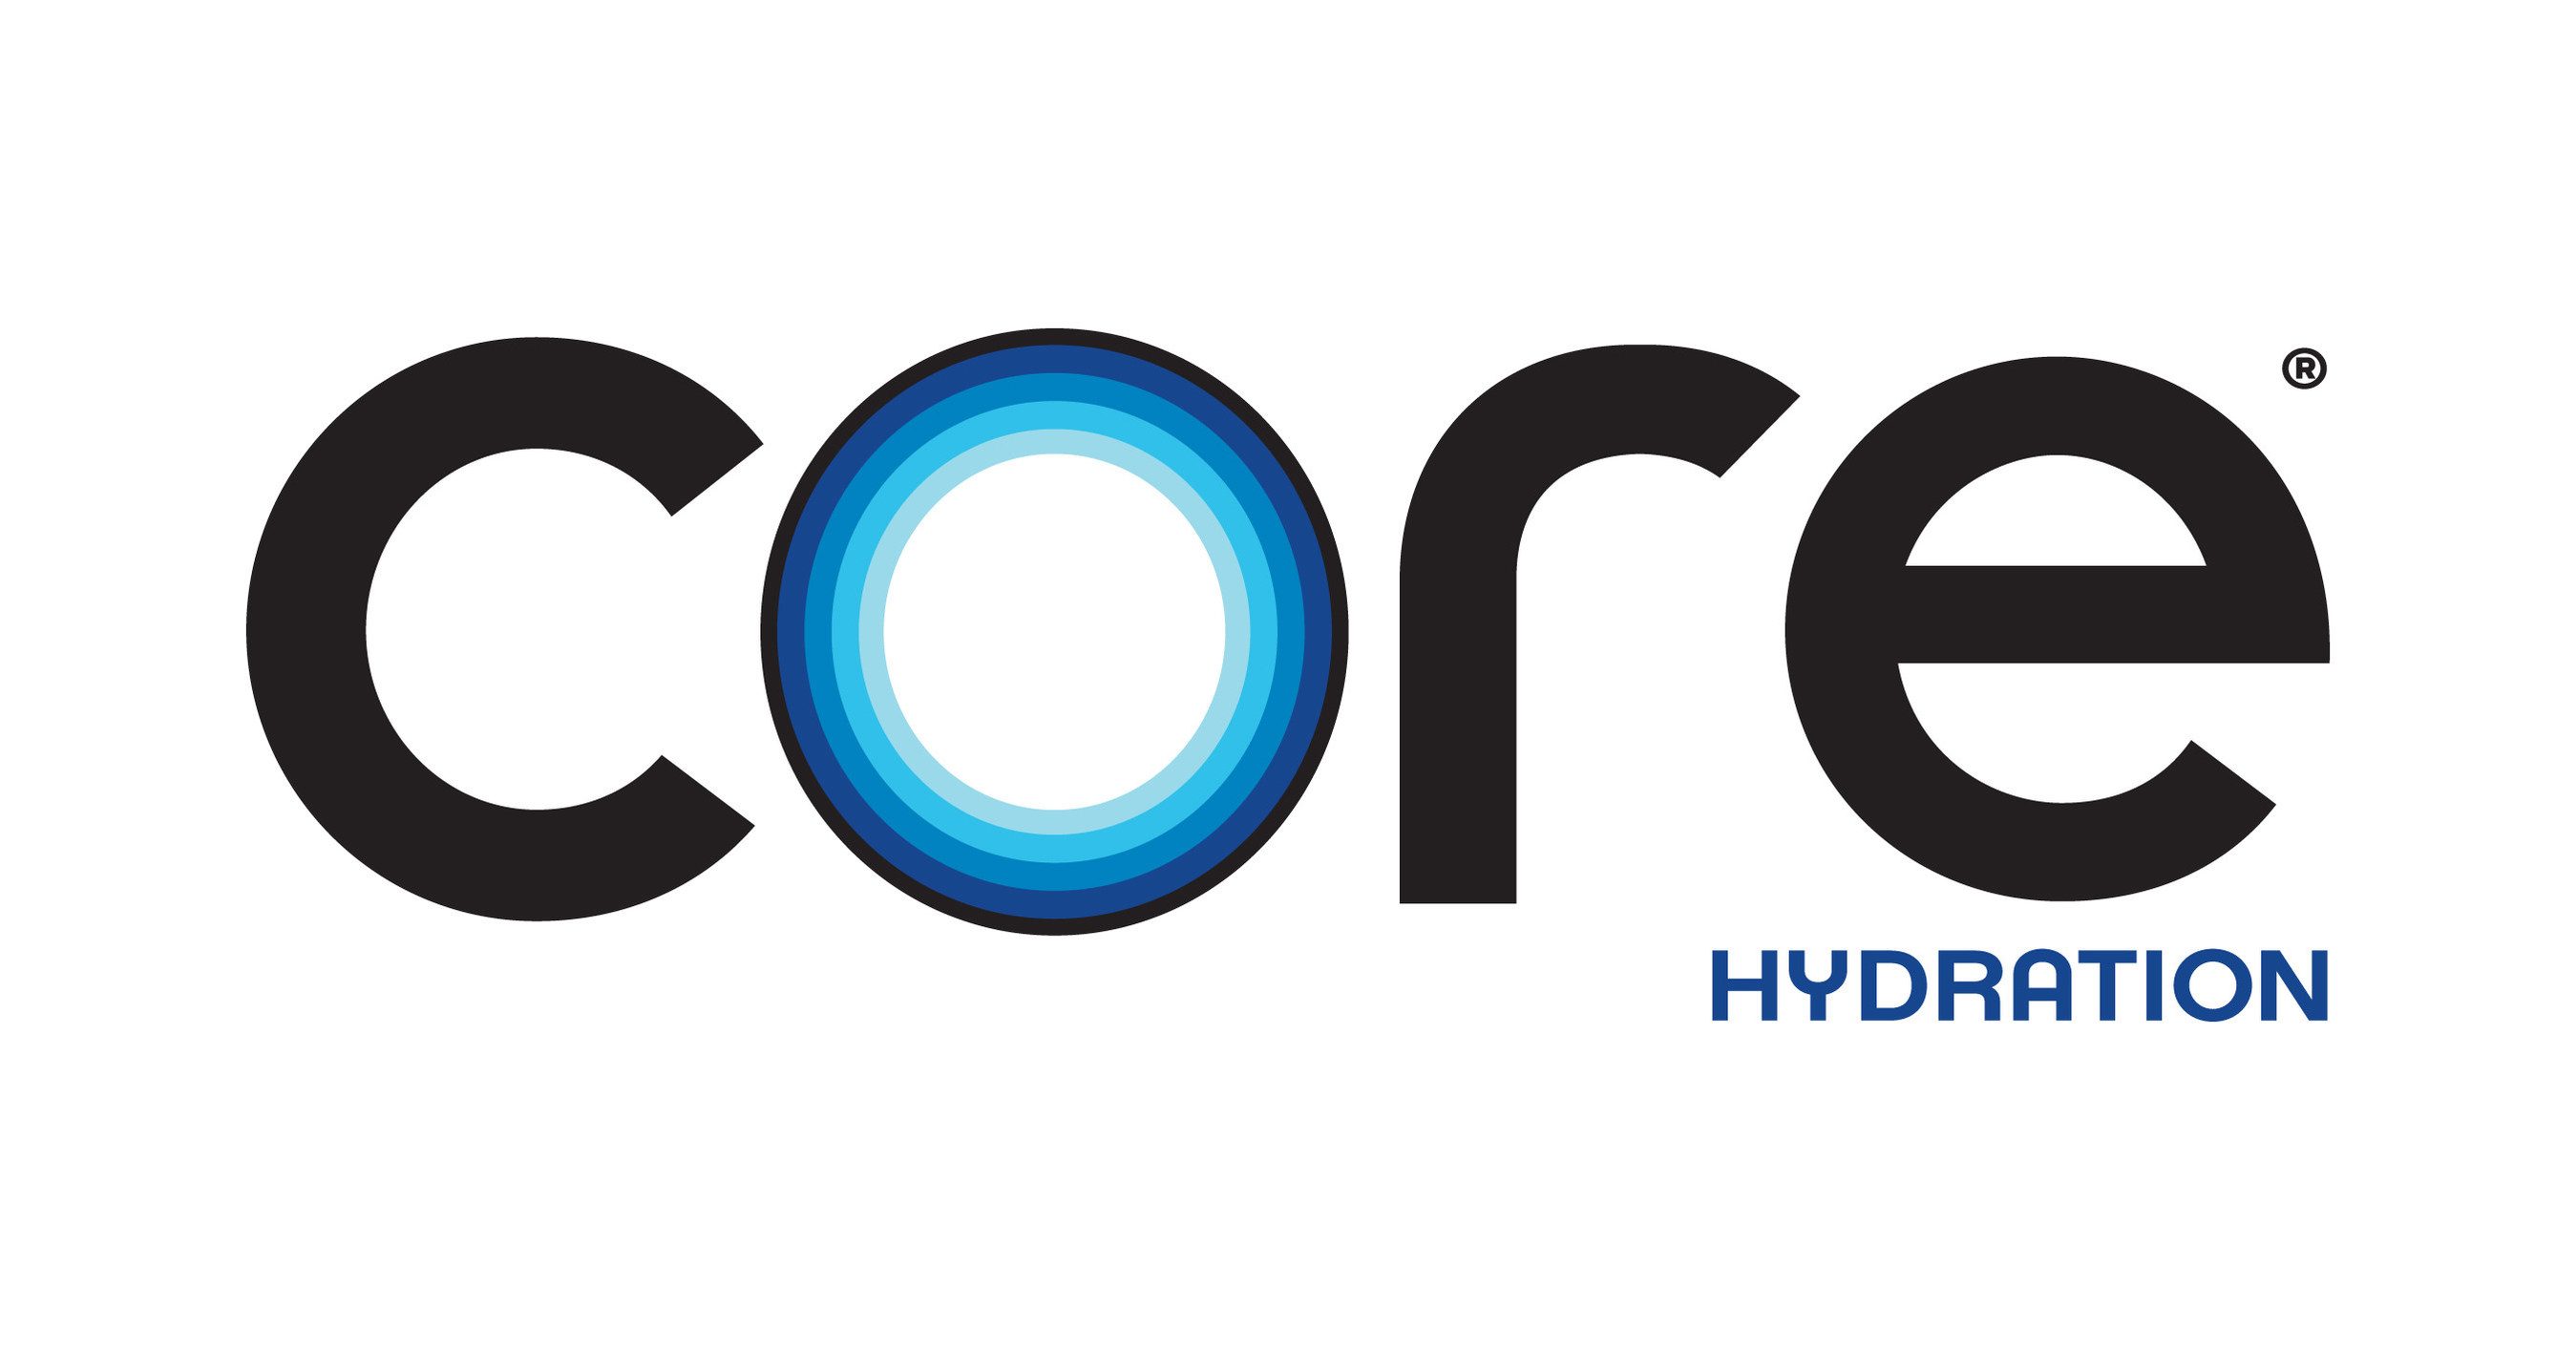 CORE® Hydration Partners with Ellie Goulding on Multimedia, Cross